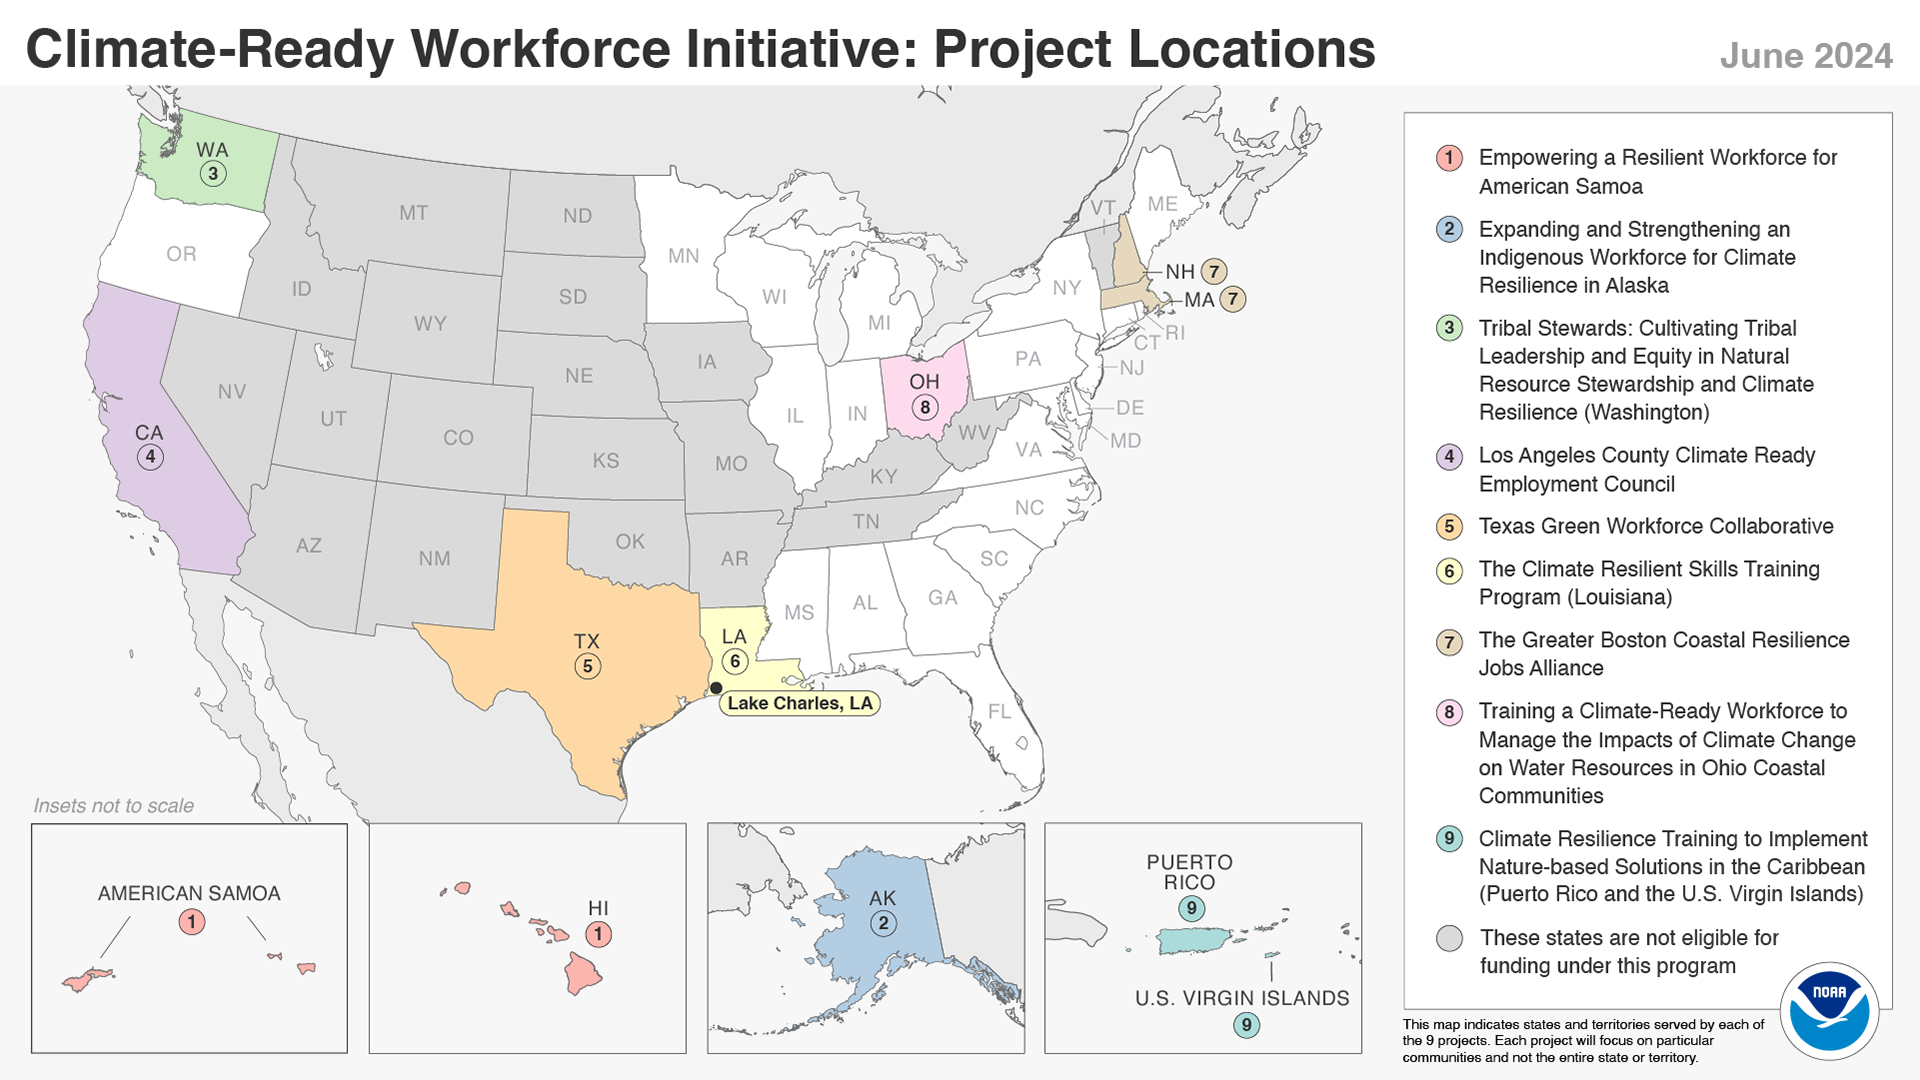 This map shows the coastal and Great Lakes states and U.S. territories where nine Climate-Ready Workforce projects will develop worker training that leads to job placement for Americans over the next four years. The workers will be placed in good jobs focused on building climate resilience in their communities. Jobs will be created in each of the states and territories shown on the map. 